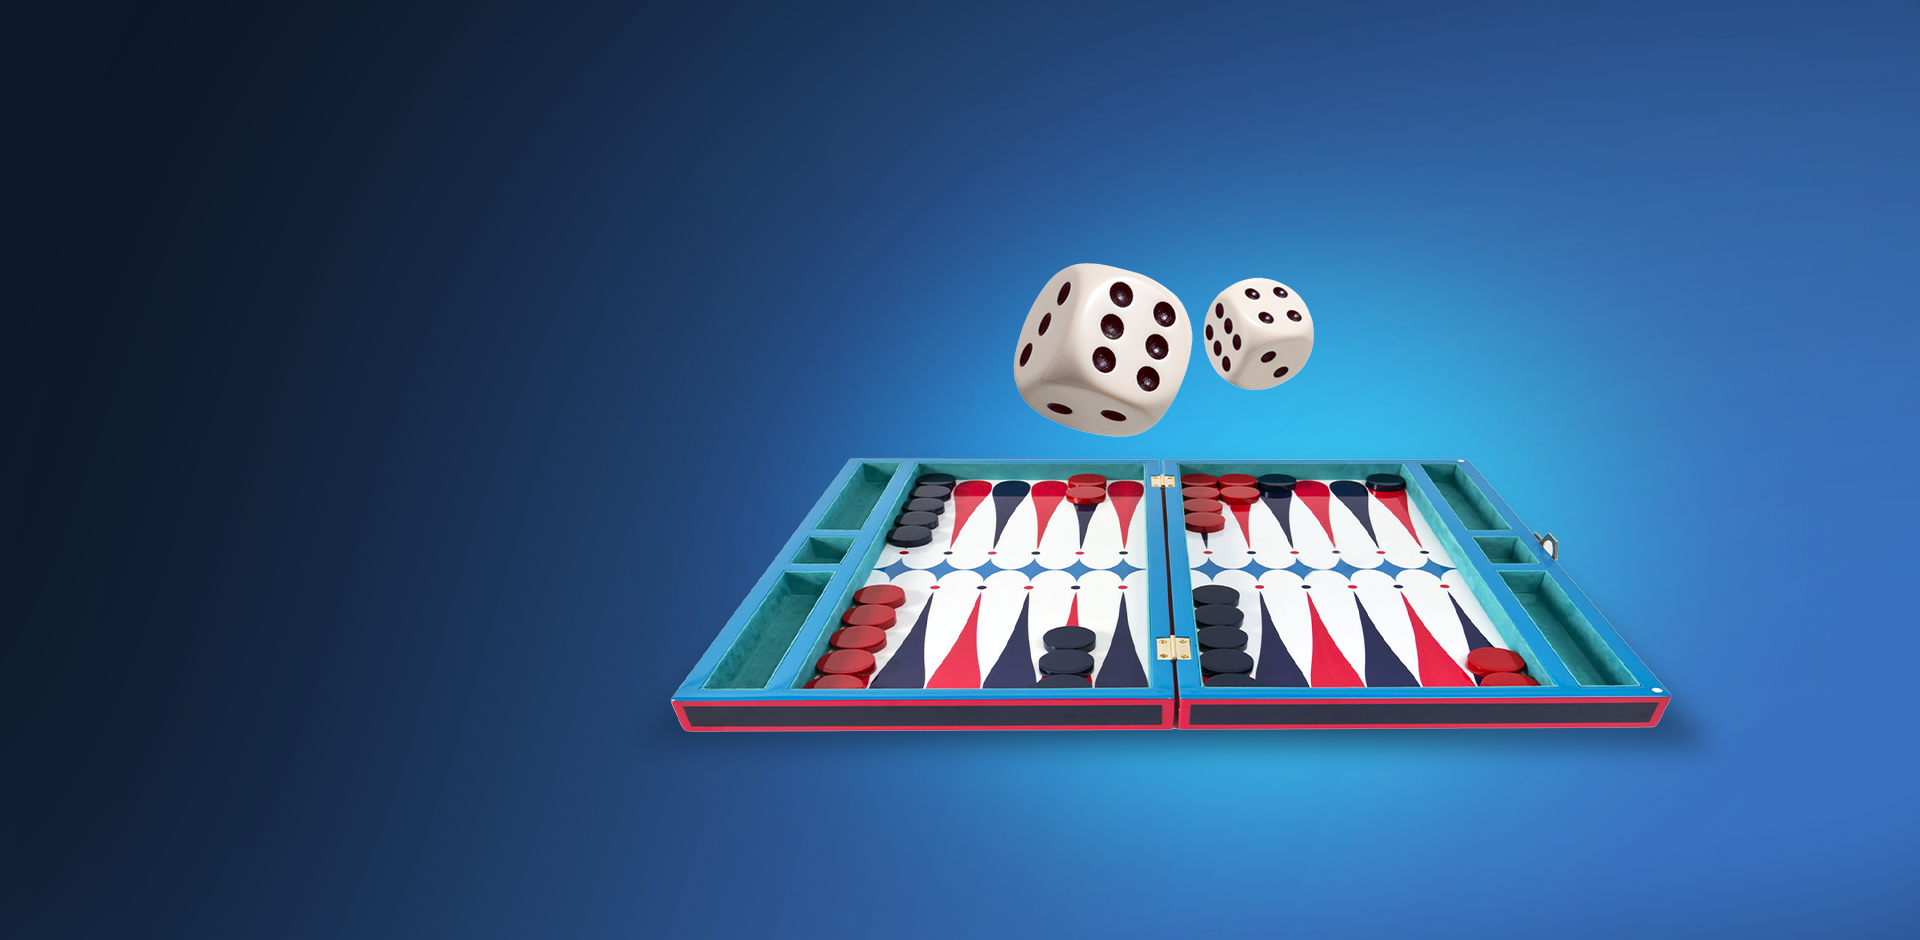 download the new version for ios Backgammon Arena